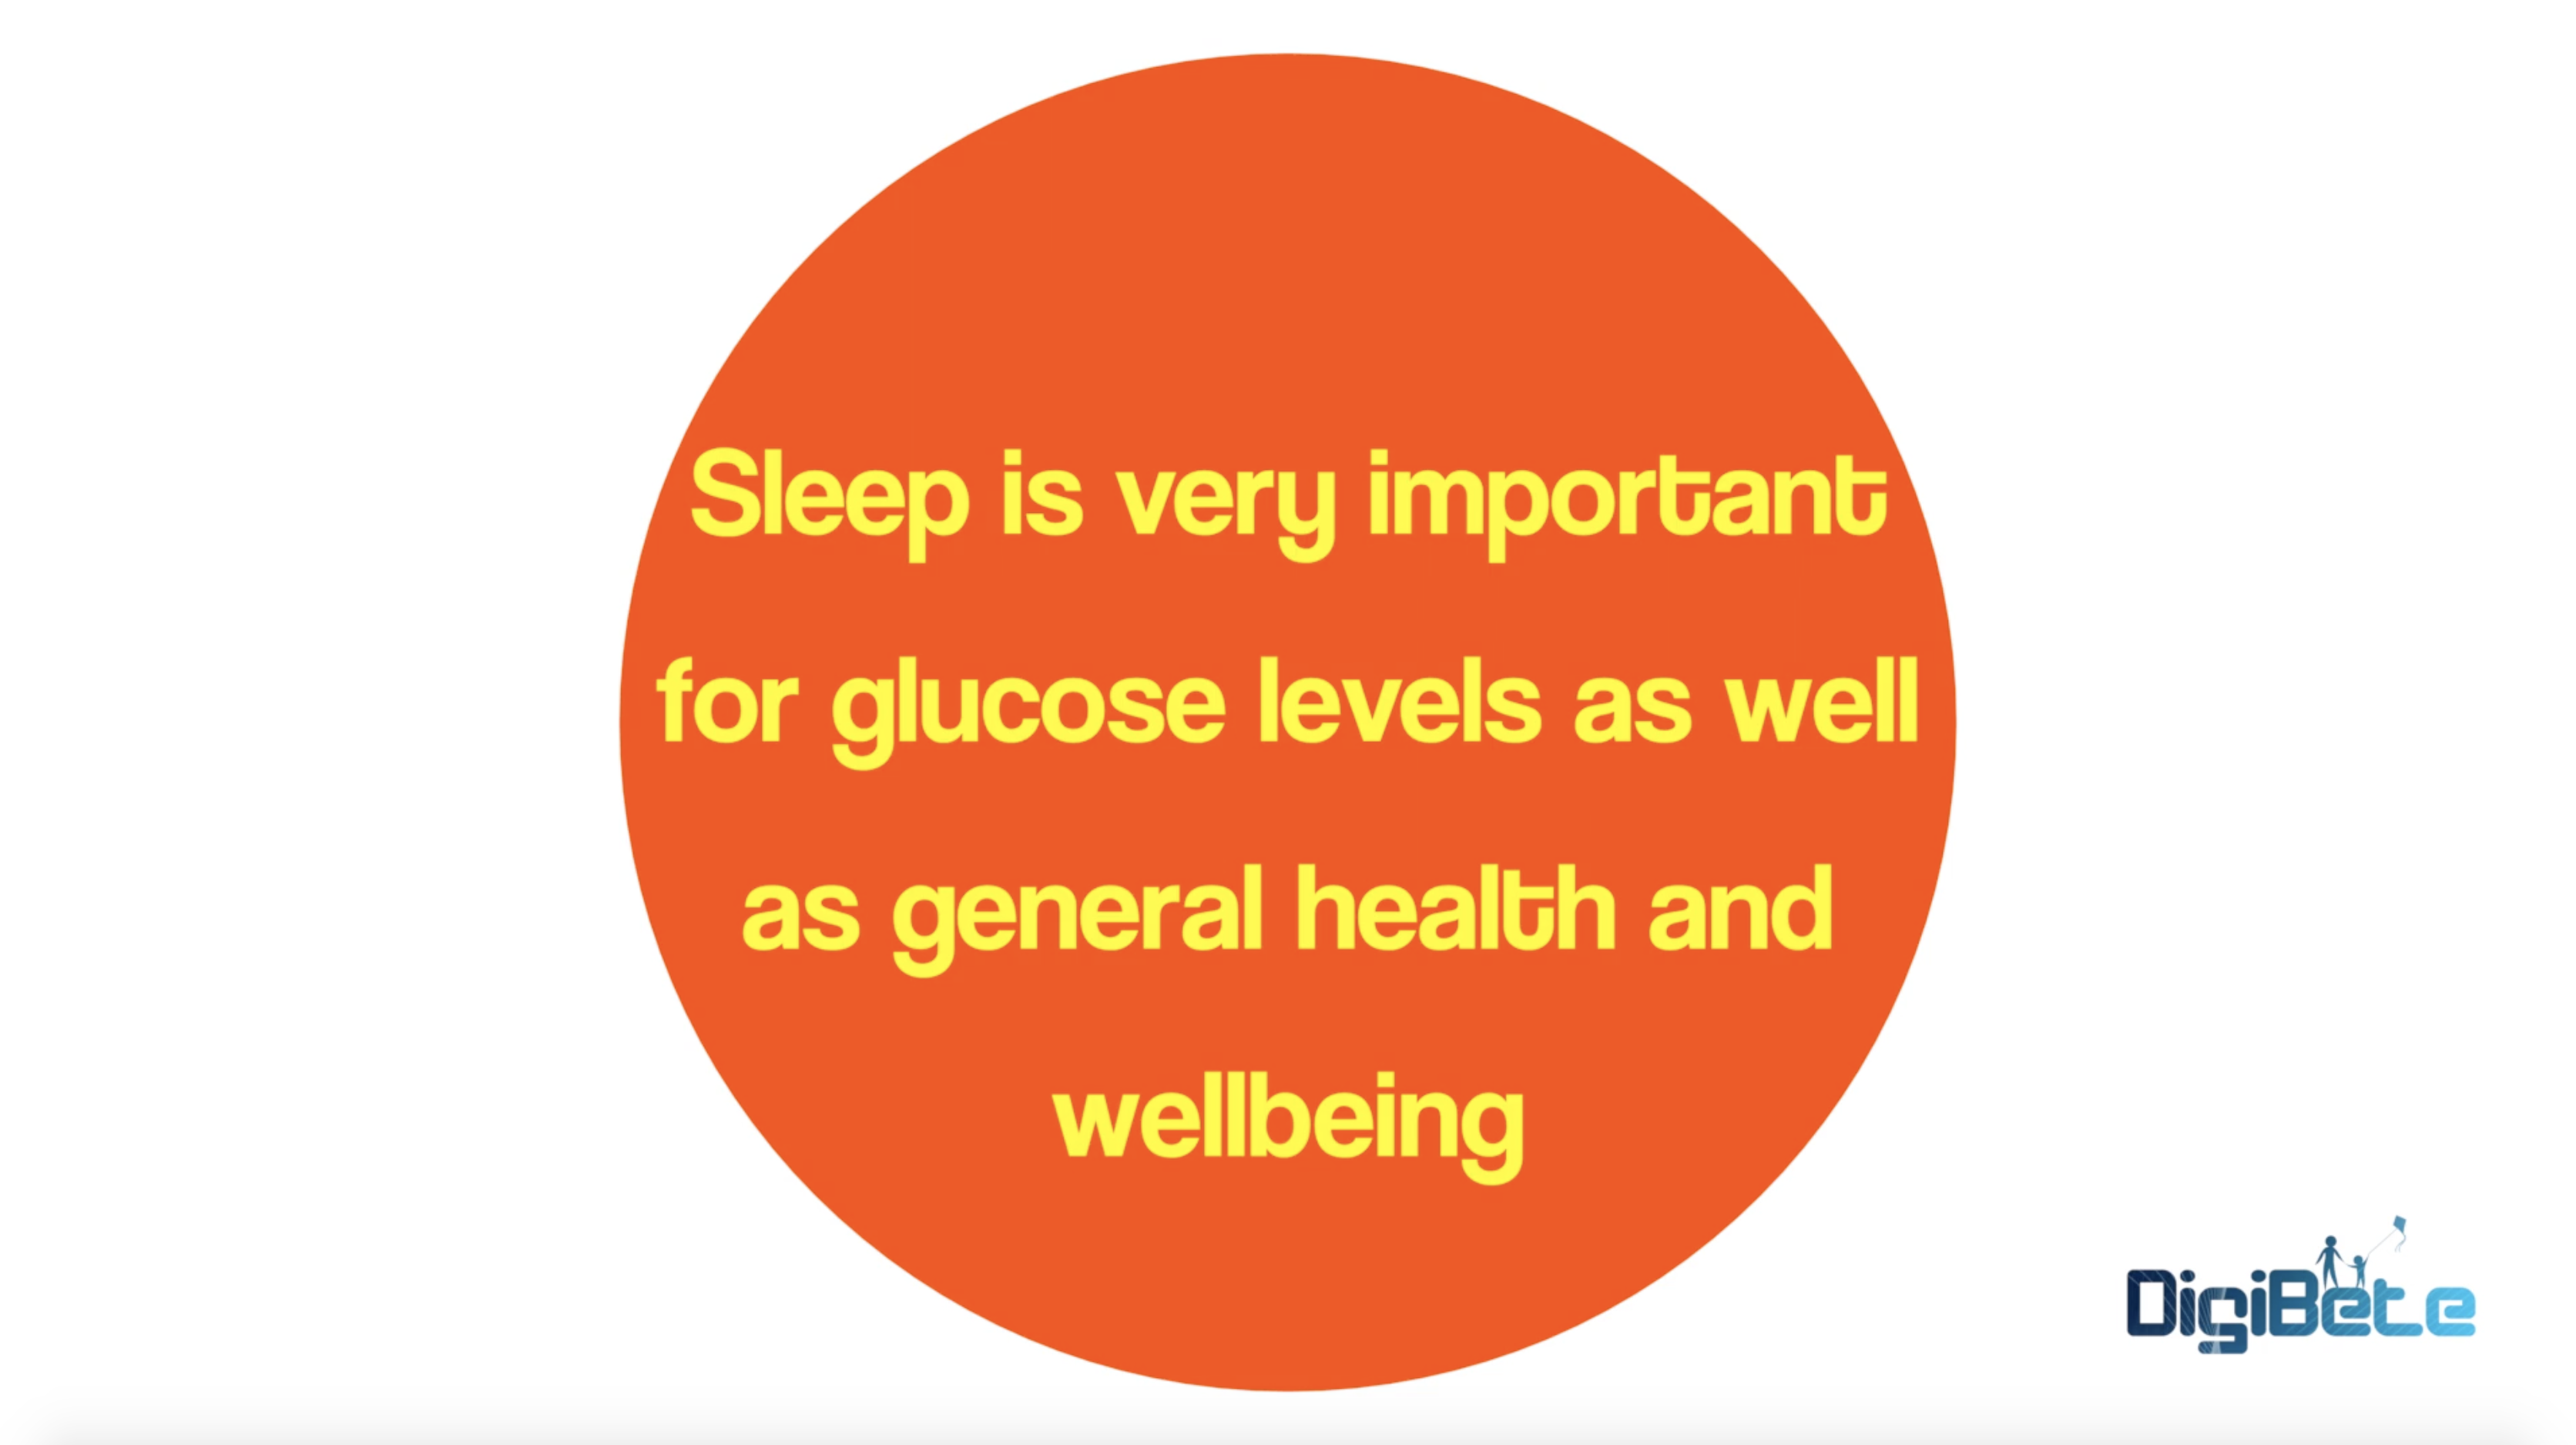 Sleep is very important for glucose levels as well as general health and wellbeing